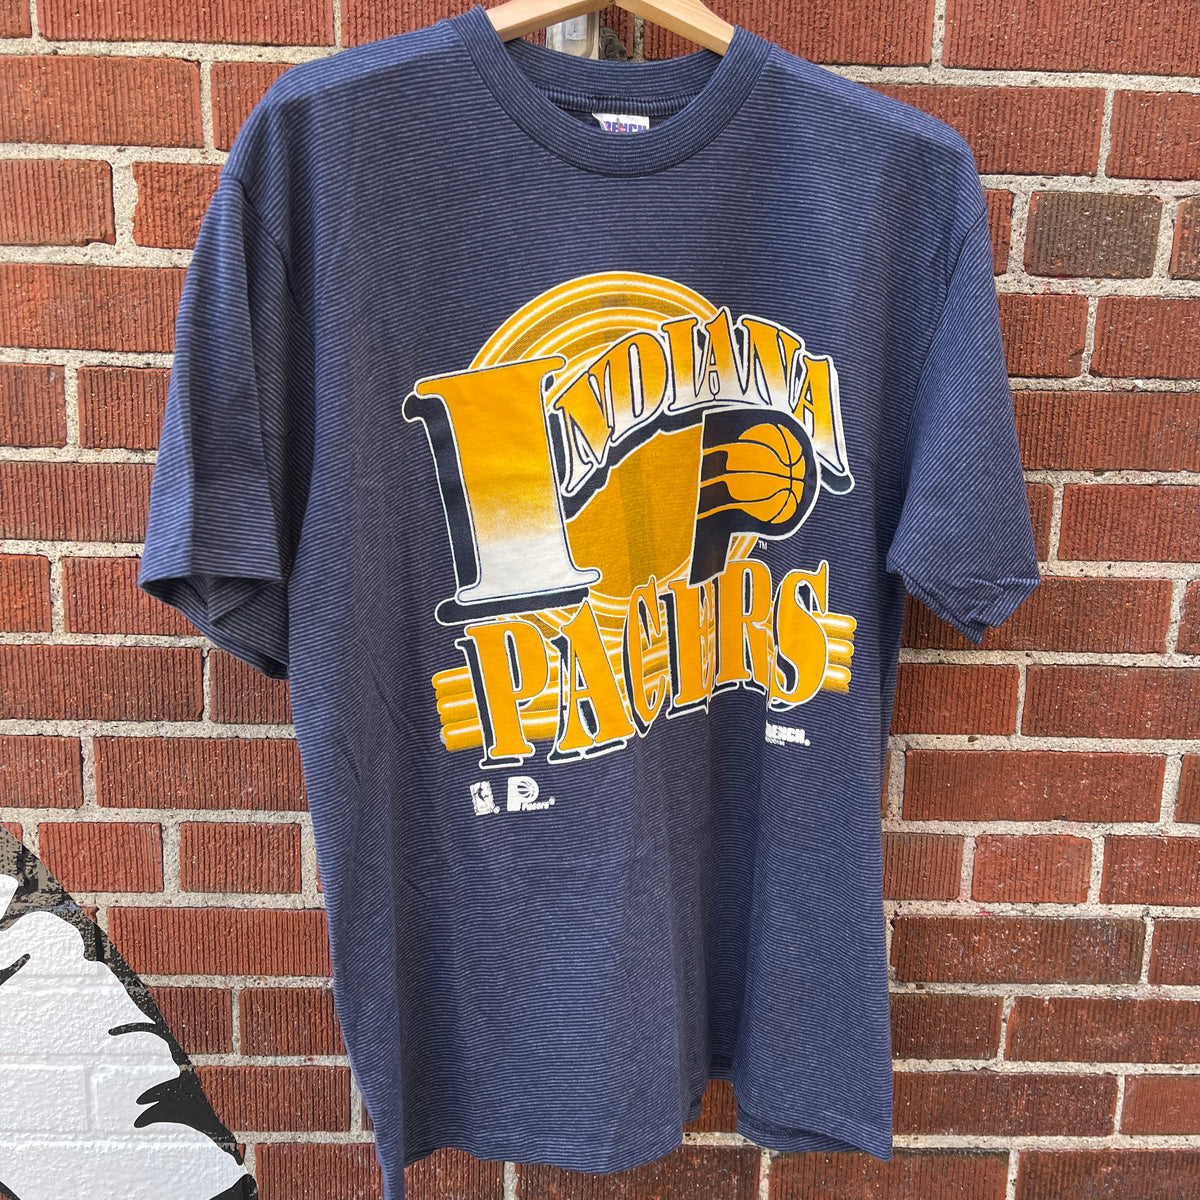 Vintage Indiana Pacers T Shirt Size Medium Quality Embroidered 